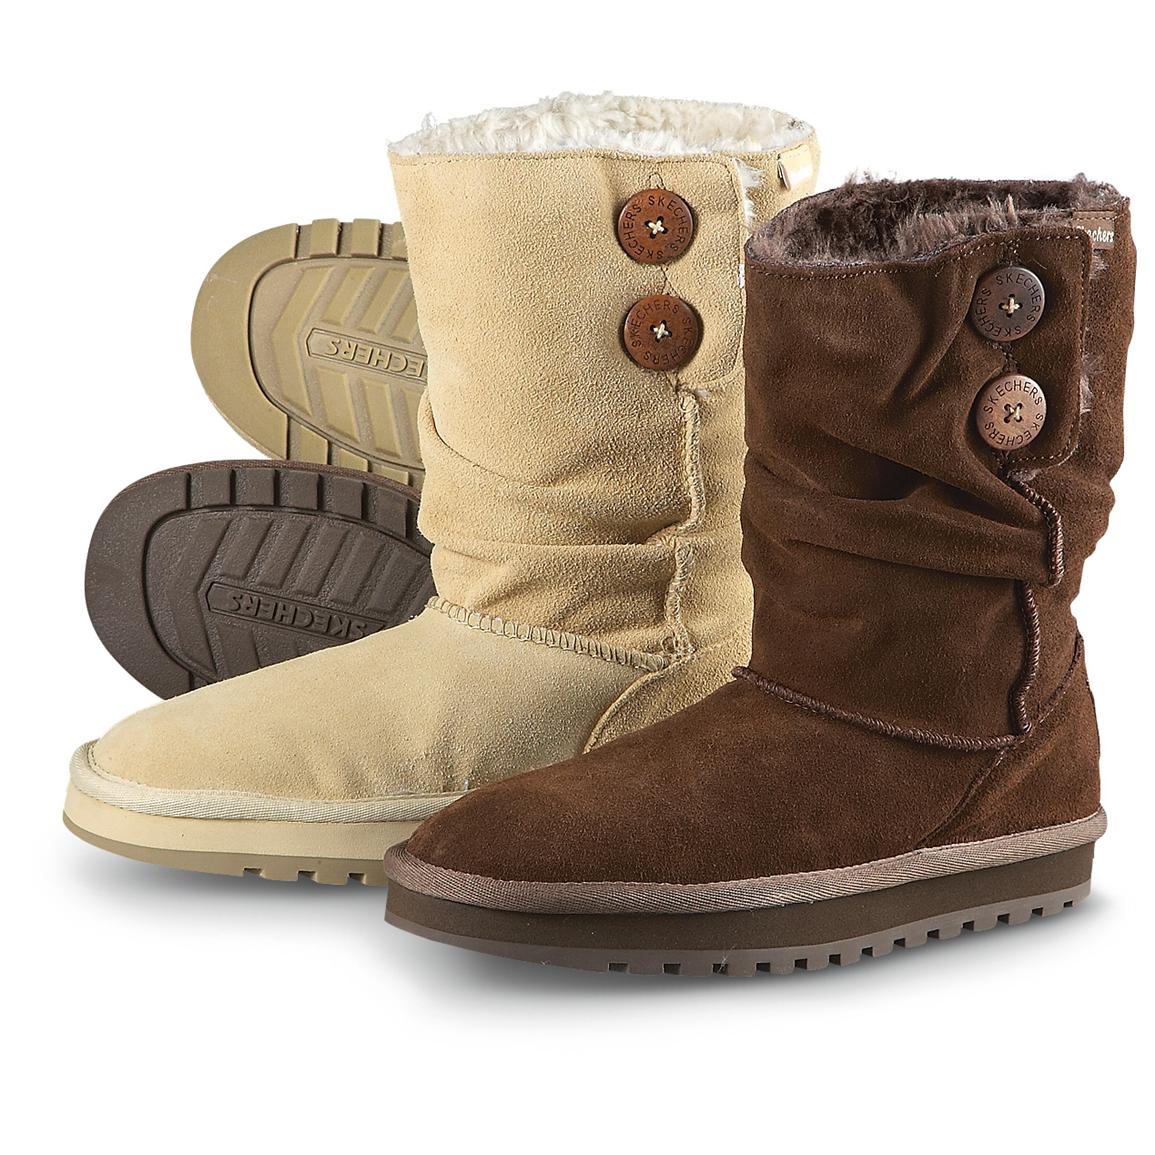 skechers ugg like boots Sale,up to 70 